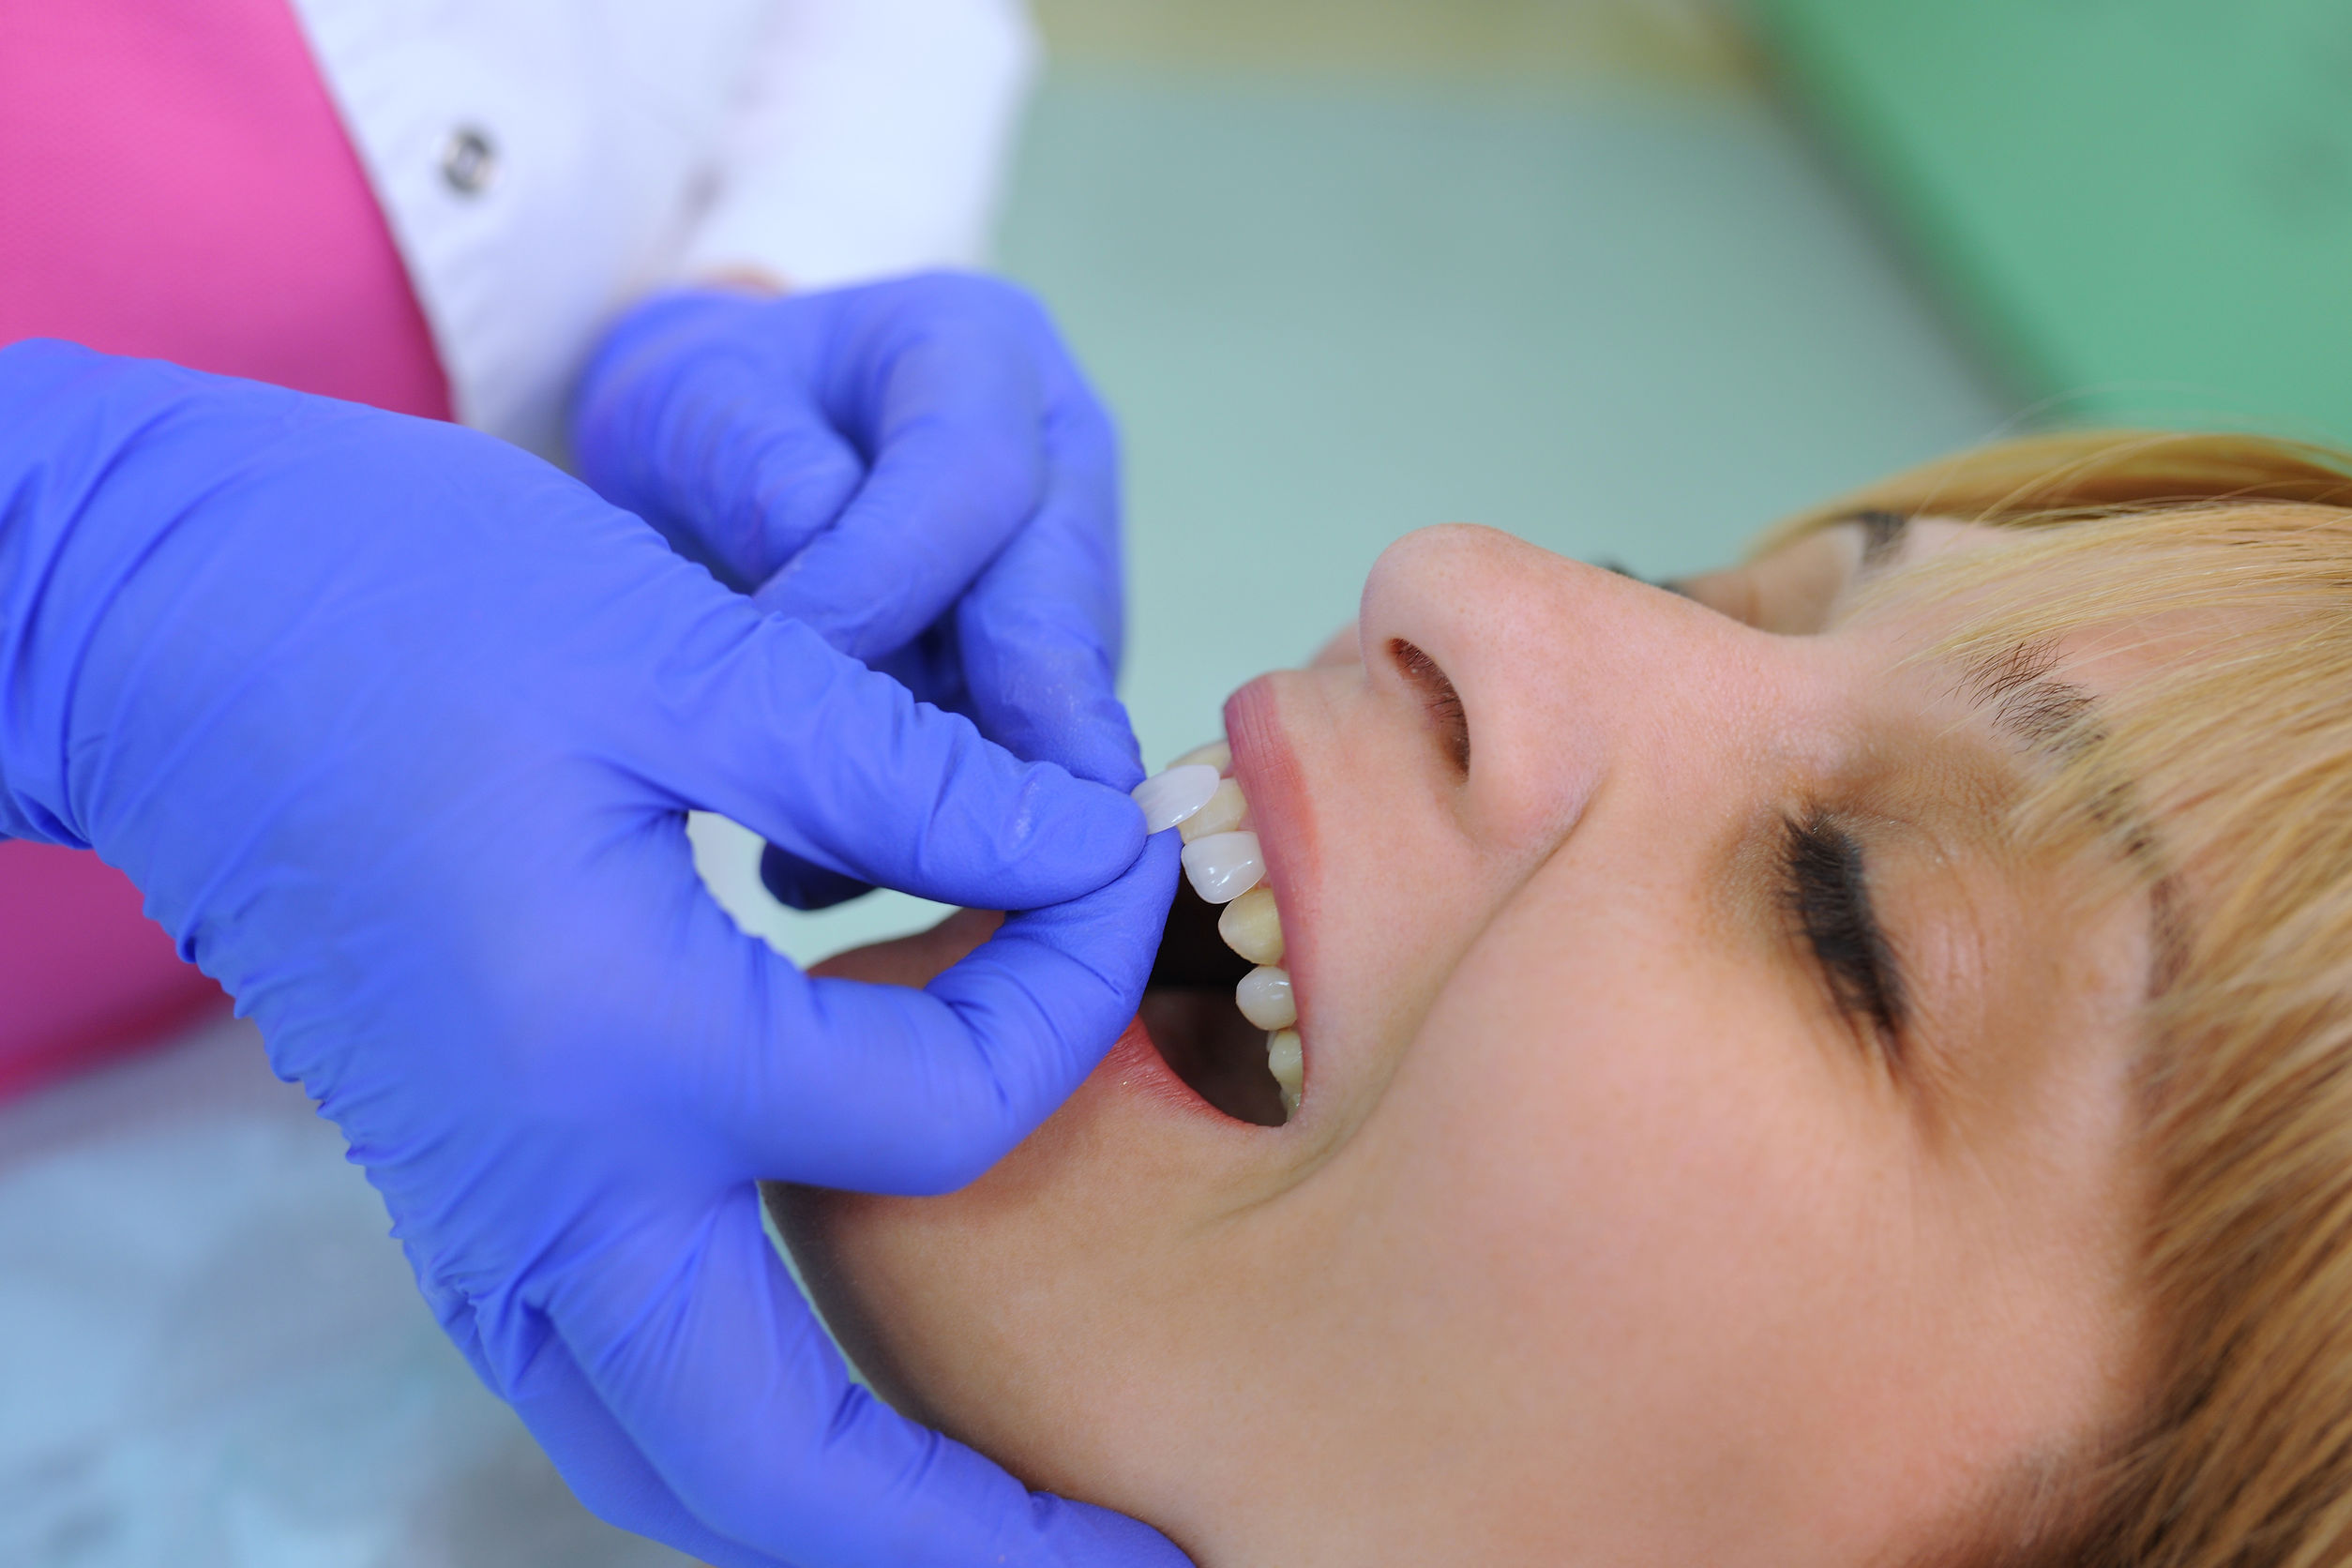 Featured image for “6 Popular Cosmetic Dentistry Treatments”